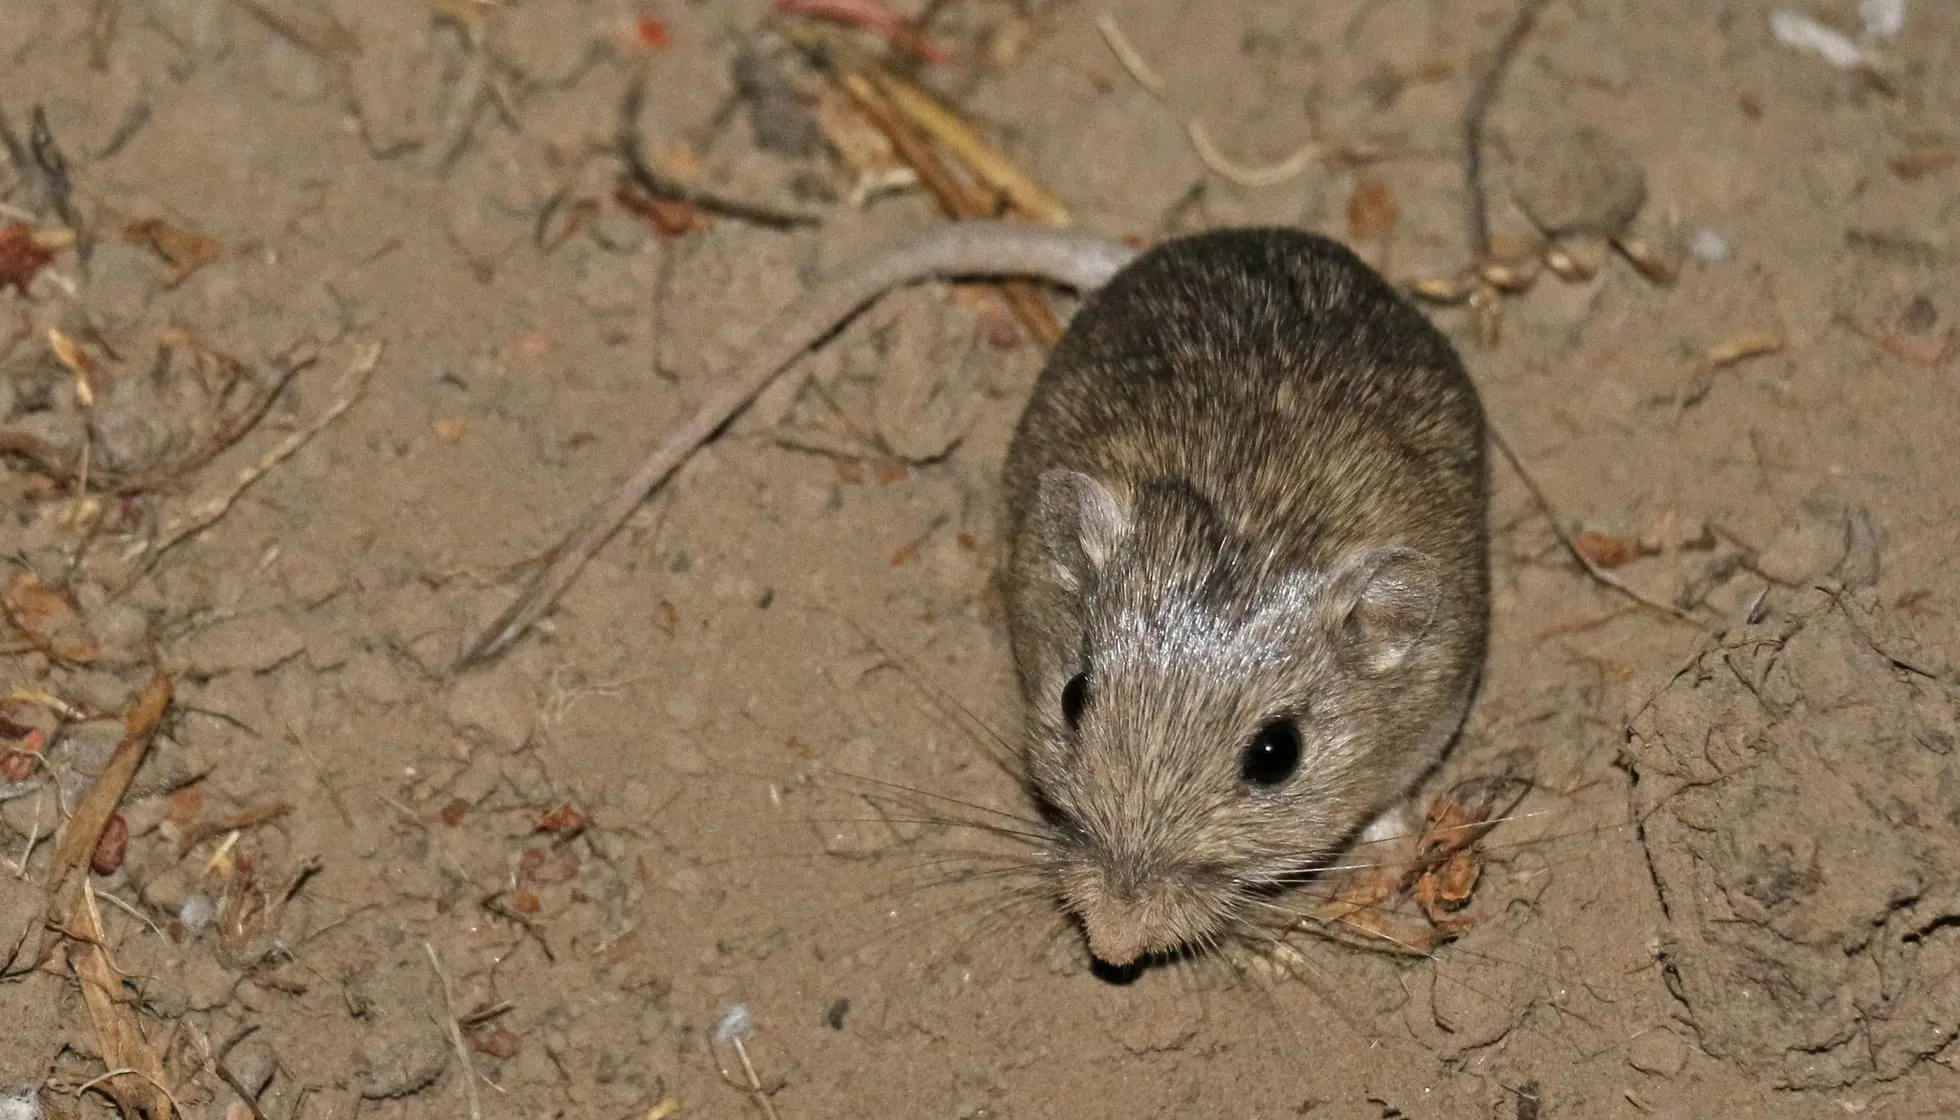 Pacific Pocket Mouse on ground